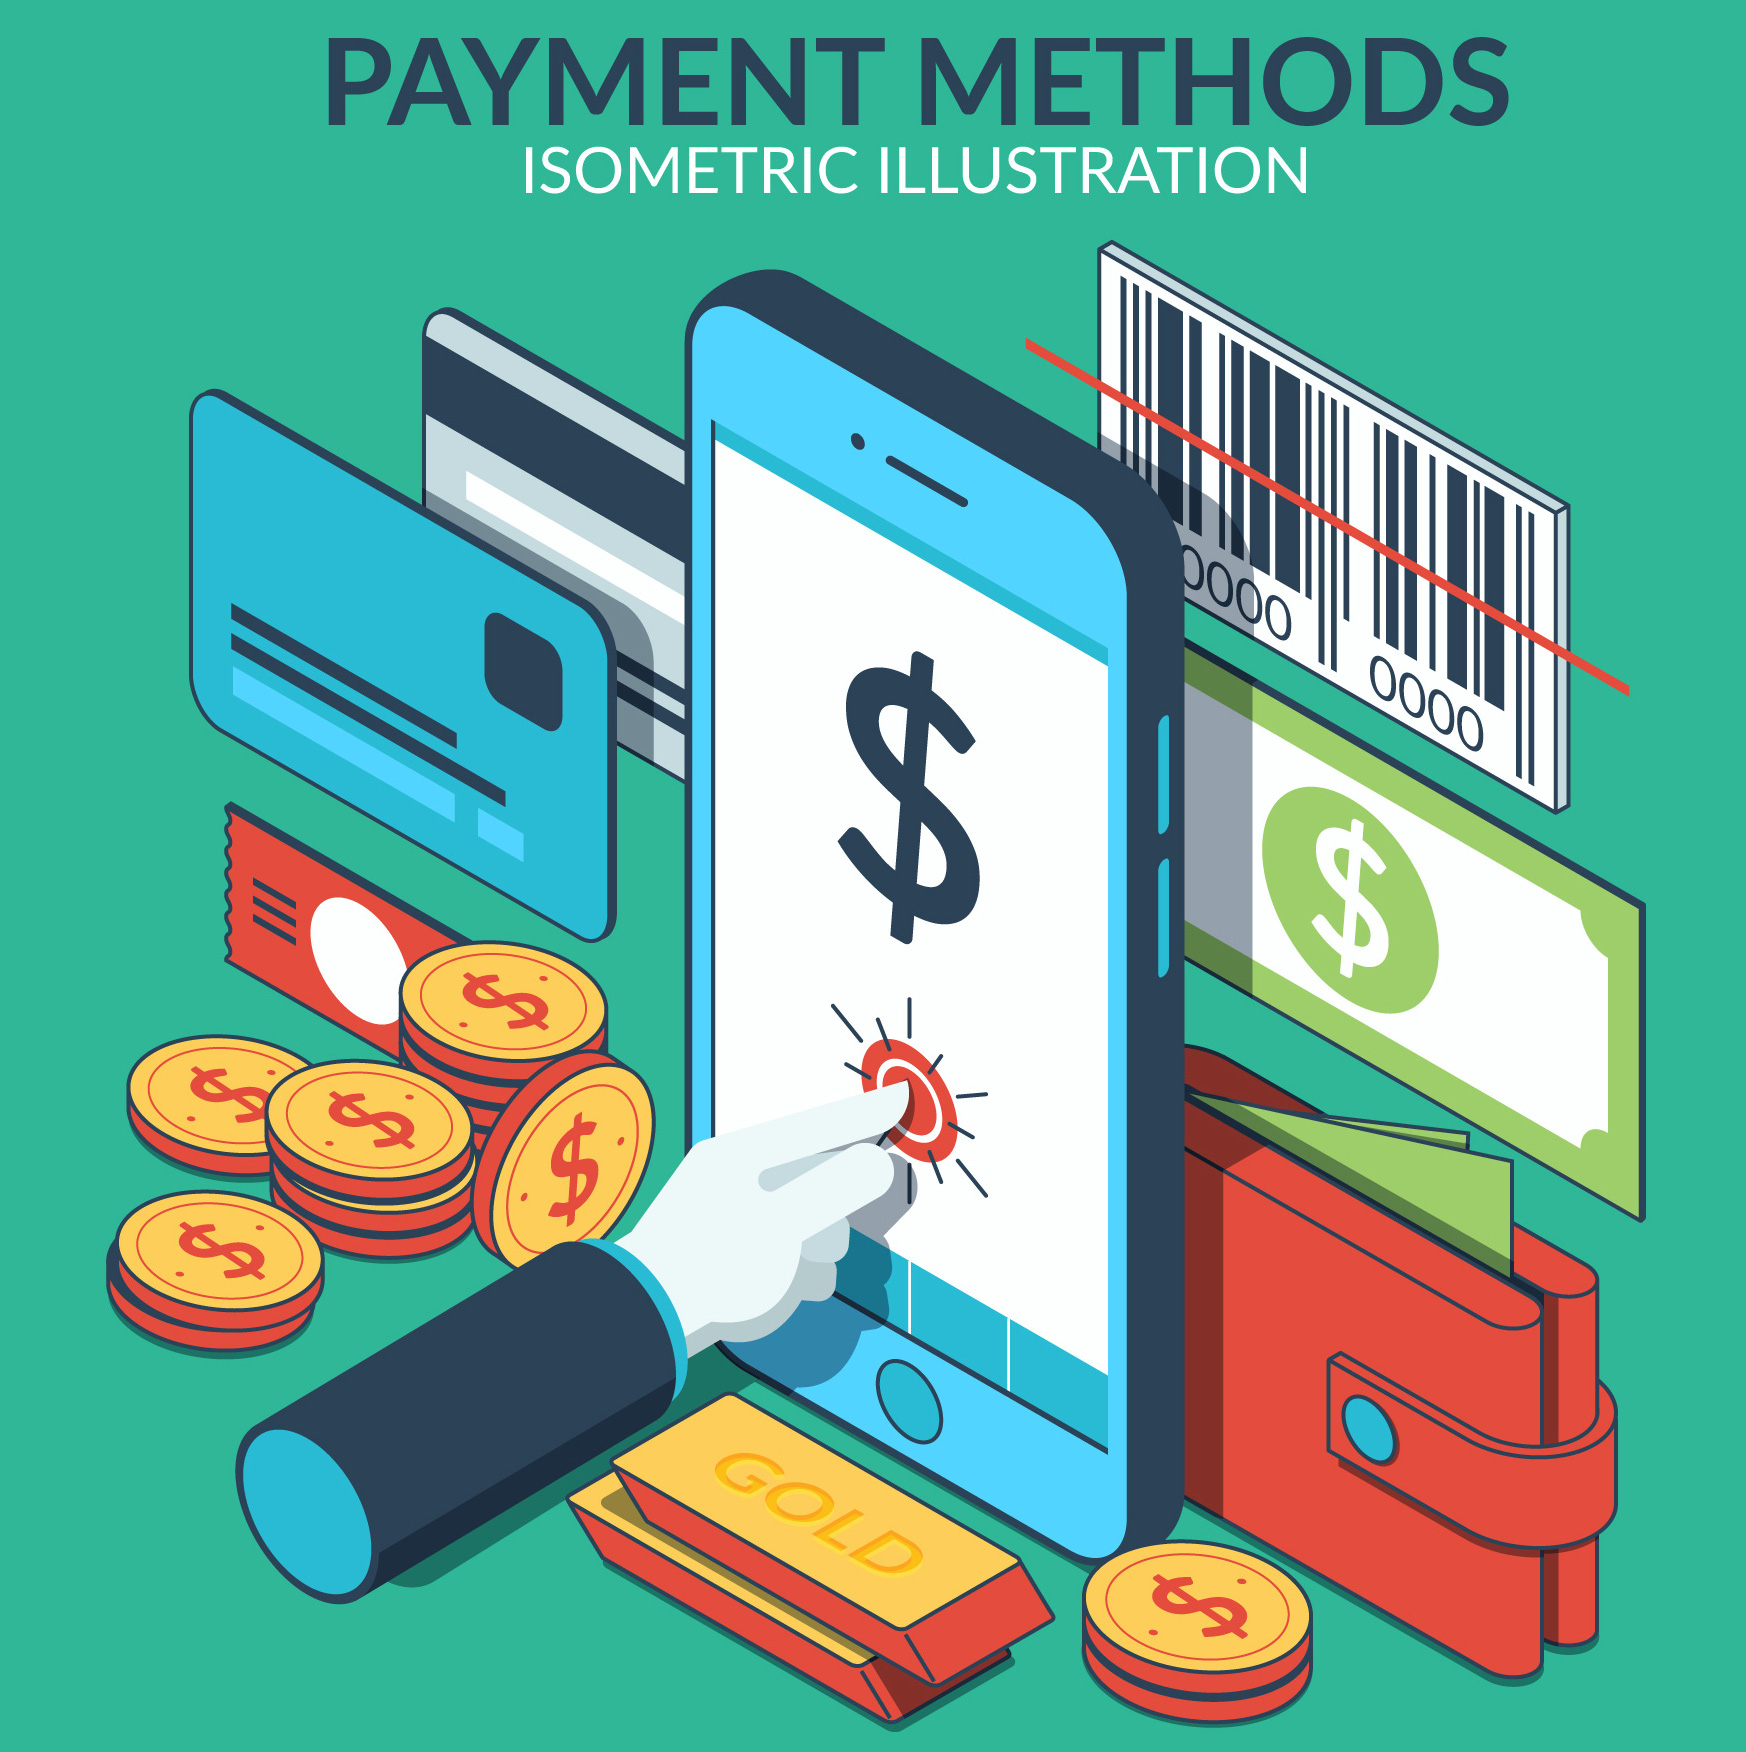 Mobile Payments and Digital Receipts